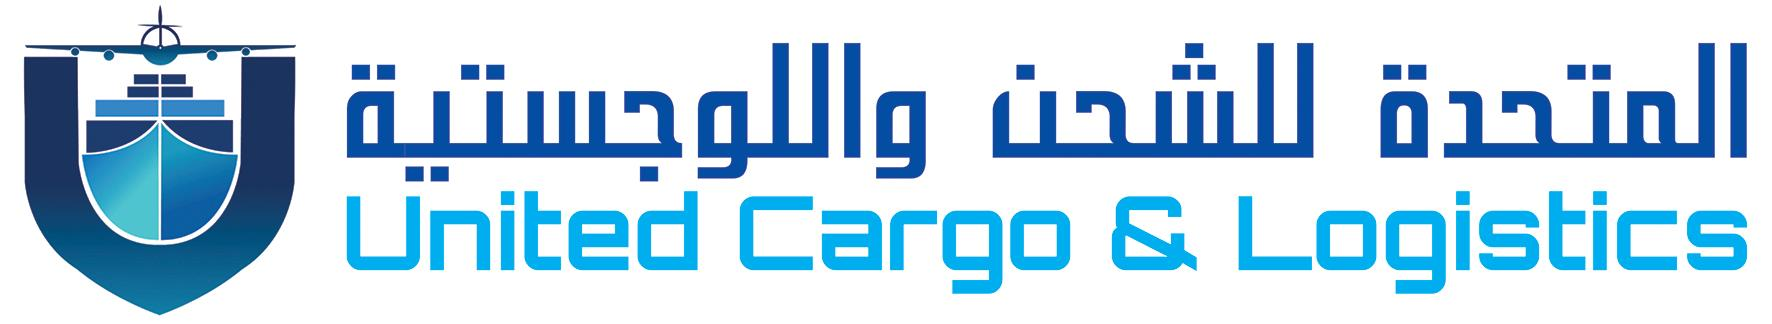 Freight Forwarders in oman, Logistics Companies in oman - JCtrans